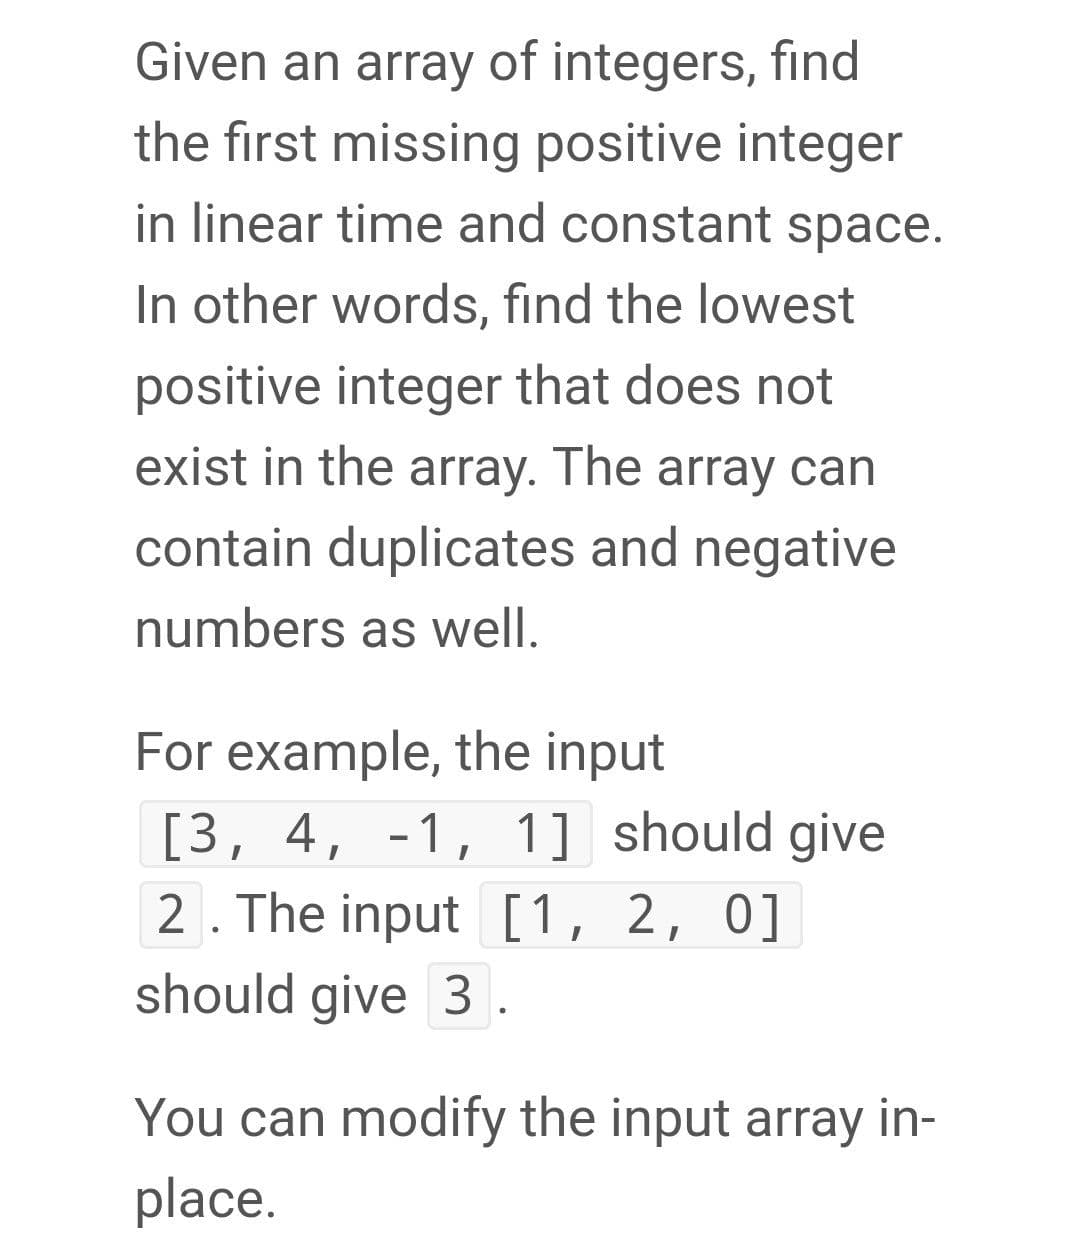 Given an array of integers, find
the first missing positive integer
in linear time and constant space.
In other words, find the lowest
positive integer that does not
exist in the array. The array can
contain duplicates and negative
numbers as well.
For example, the input
[3, 4, -1, 1] should give
2. The input [1, 2, 0]
should give 3.
You can modify the input array in-
place.
